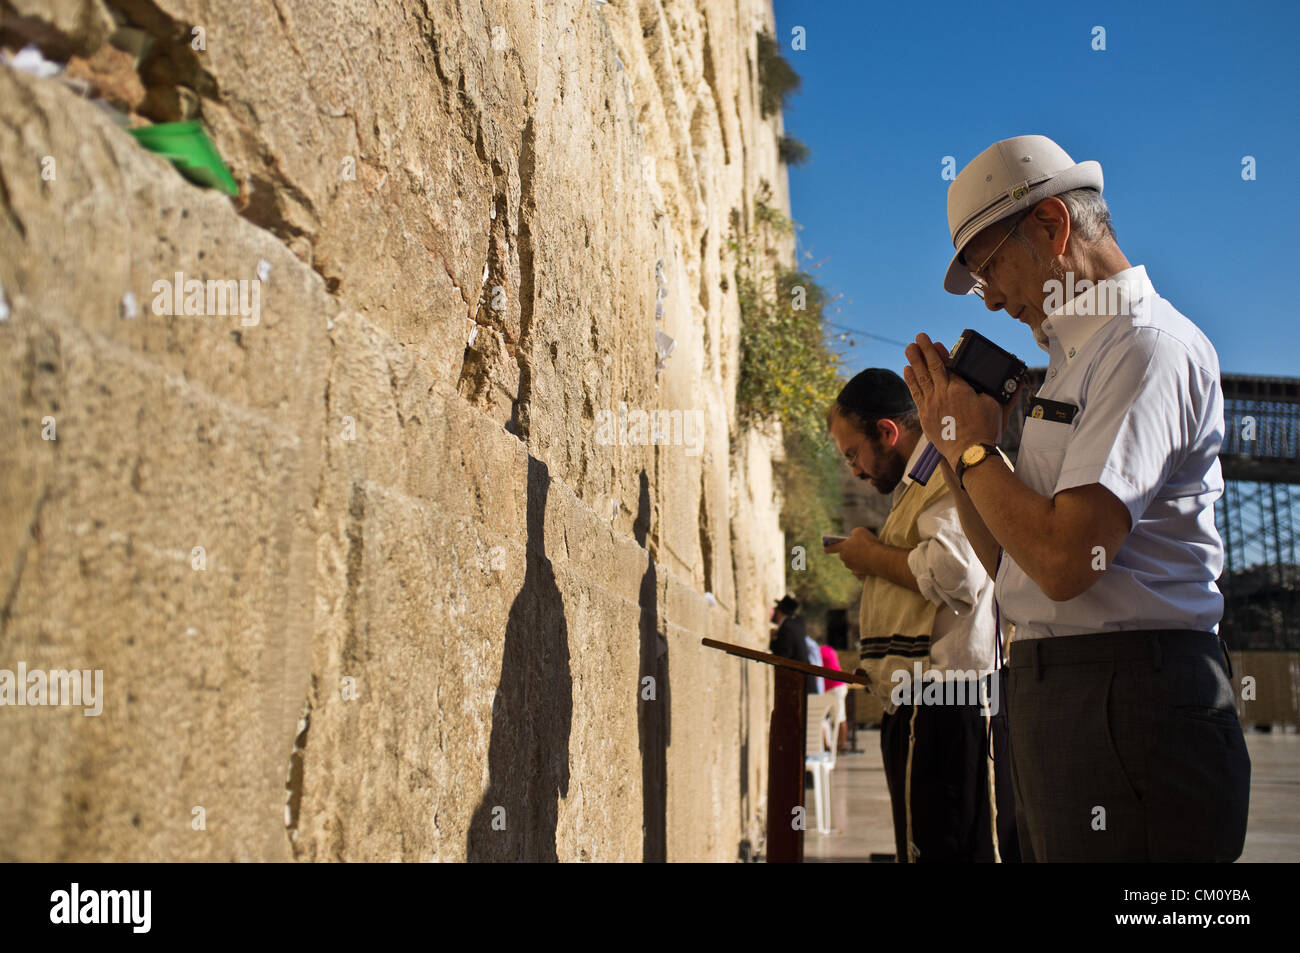 A Hibakusha, a Hiroshima child survivor, prays at the Western Wall besides a religious Jew. Jerusalem, Israel. 10-September-2012.  Hibakusha, survivors of the August 6th, 1945 bombing of Hiroshima, visit Israel to promote nuclear abolition. Calling “No More Hiroshimas, No More Nagasakis!” they place their prayers between the Kotel stones. Stock Photo